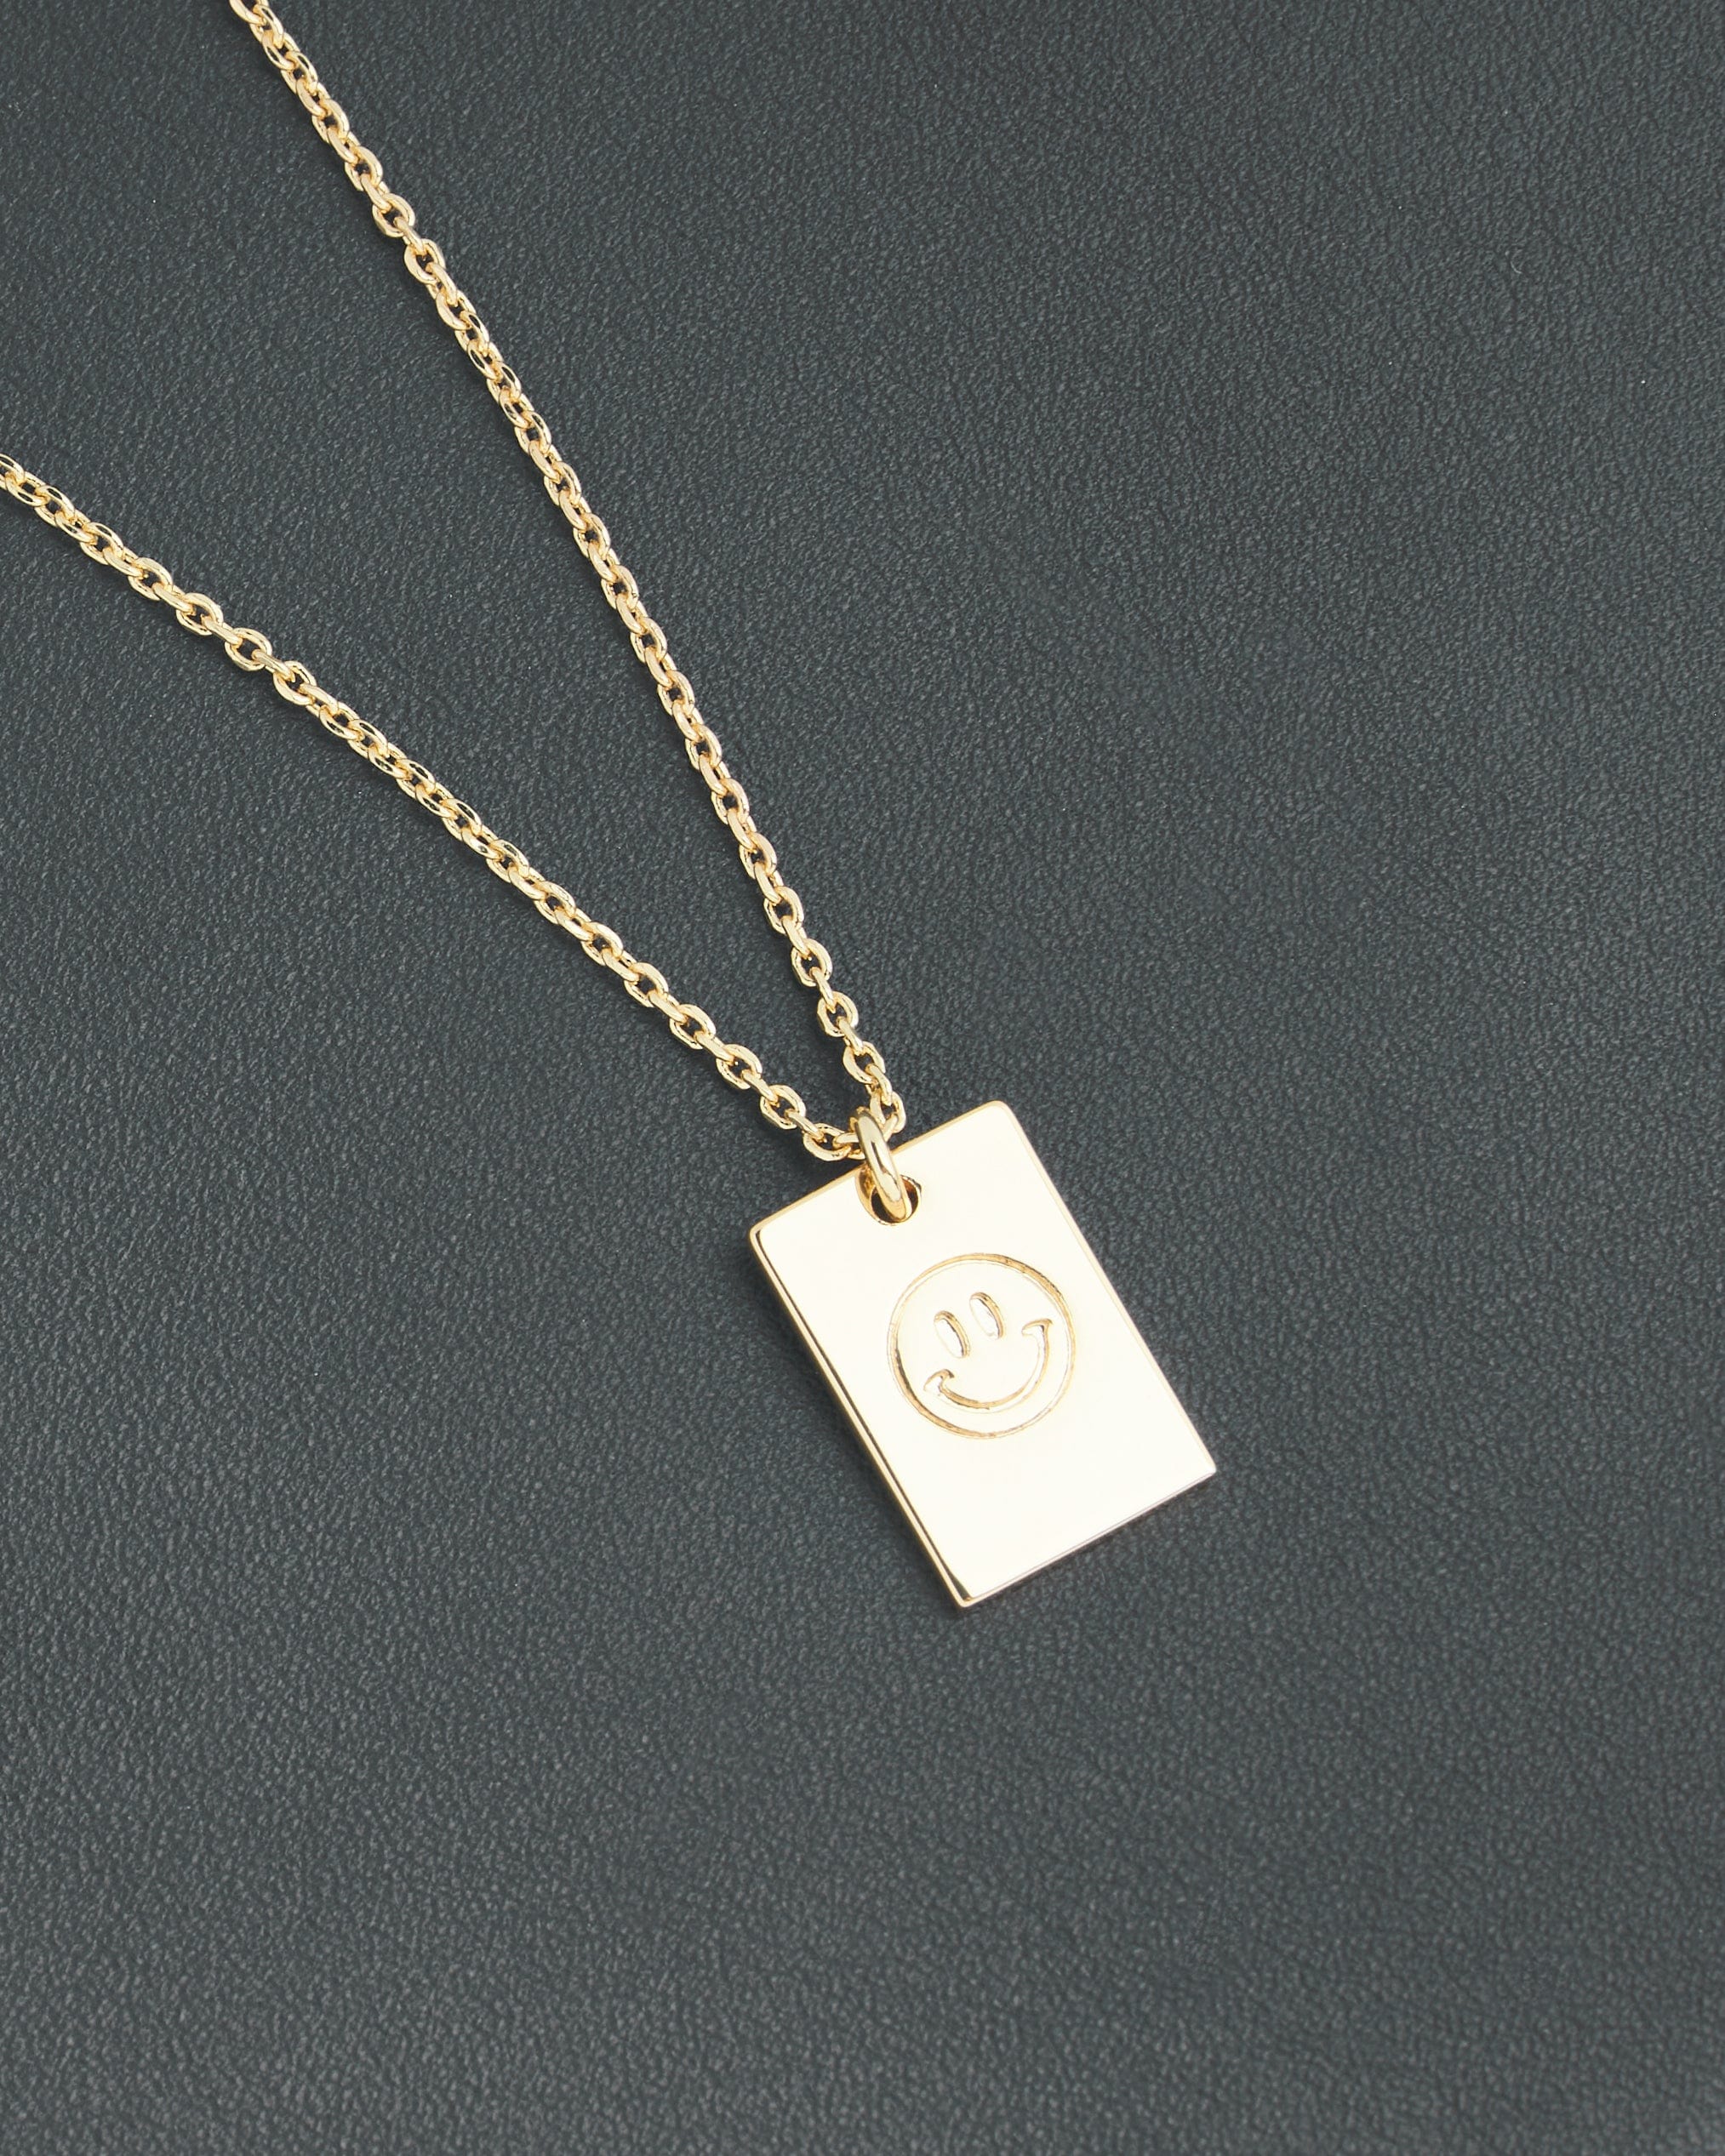 Gold necklace with smiley face on pendant